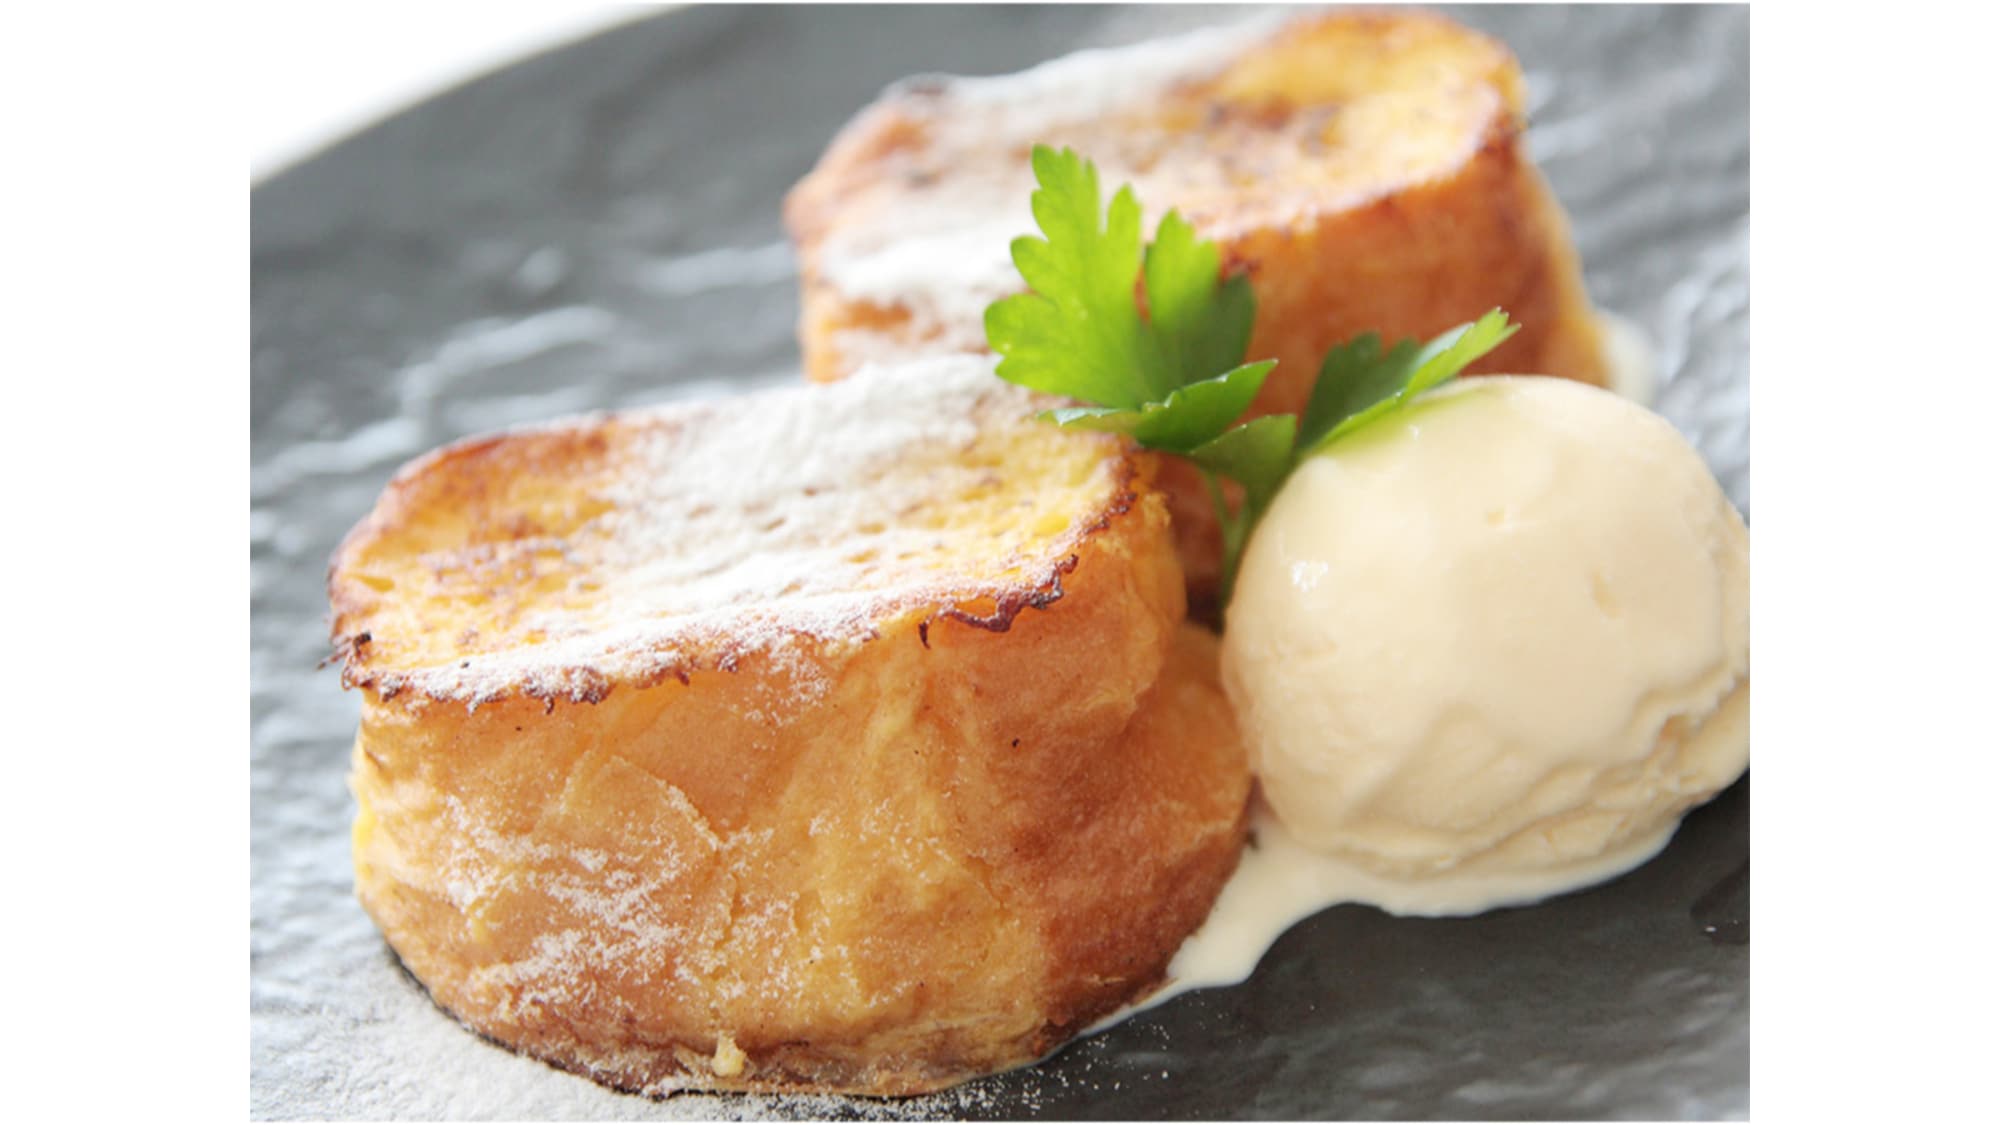 French toast like pudding that is as good as a famous specialty store that takes 20 hours to prepare